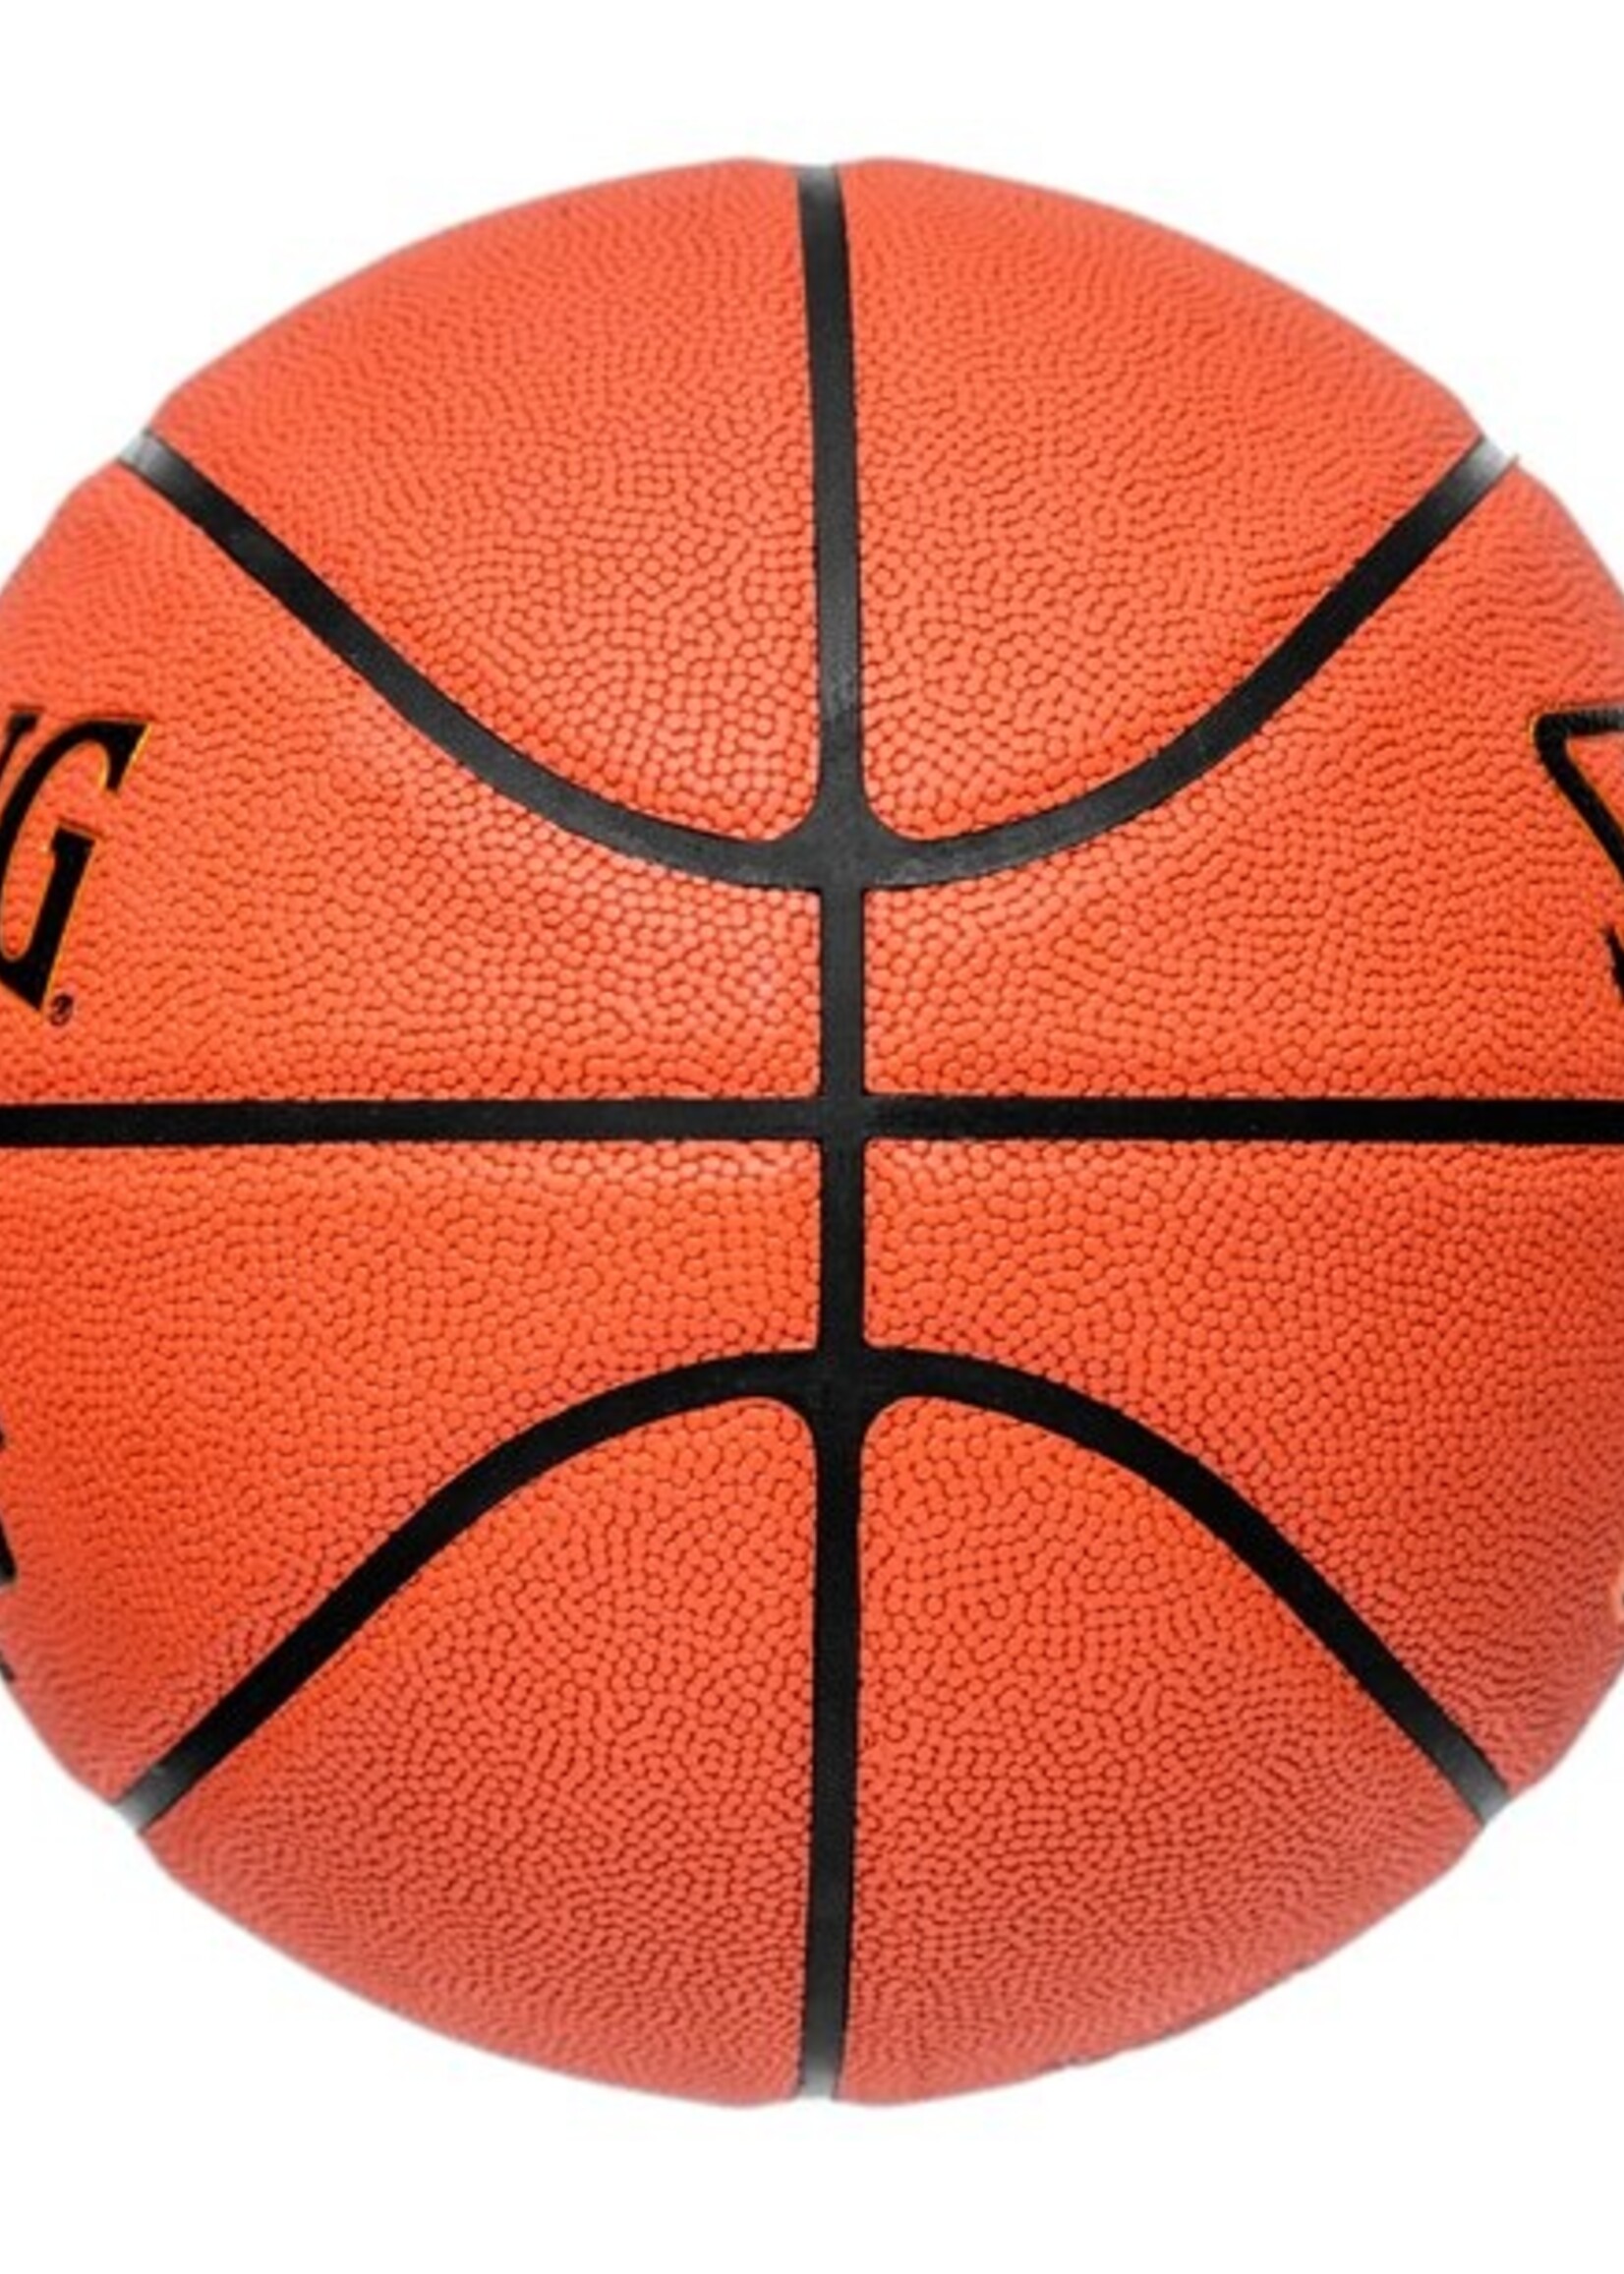 Spalding Excel TF-500 All Surface basketbal